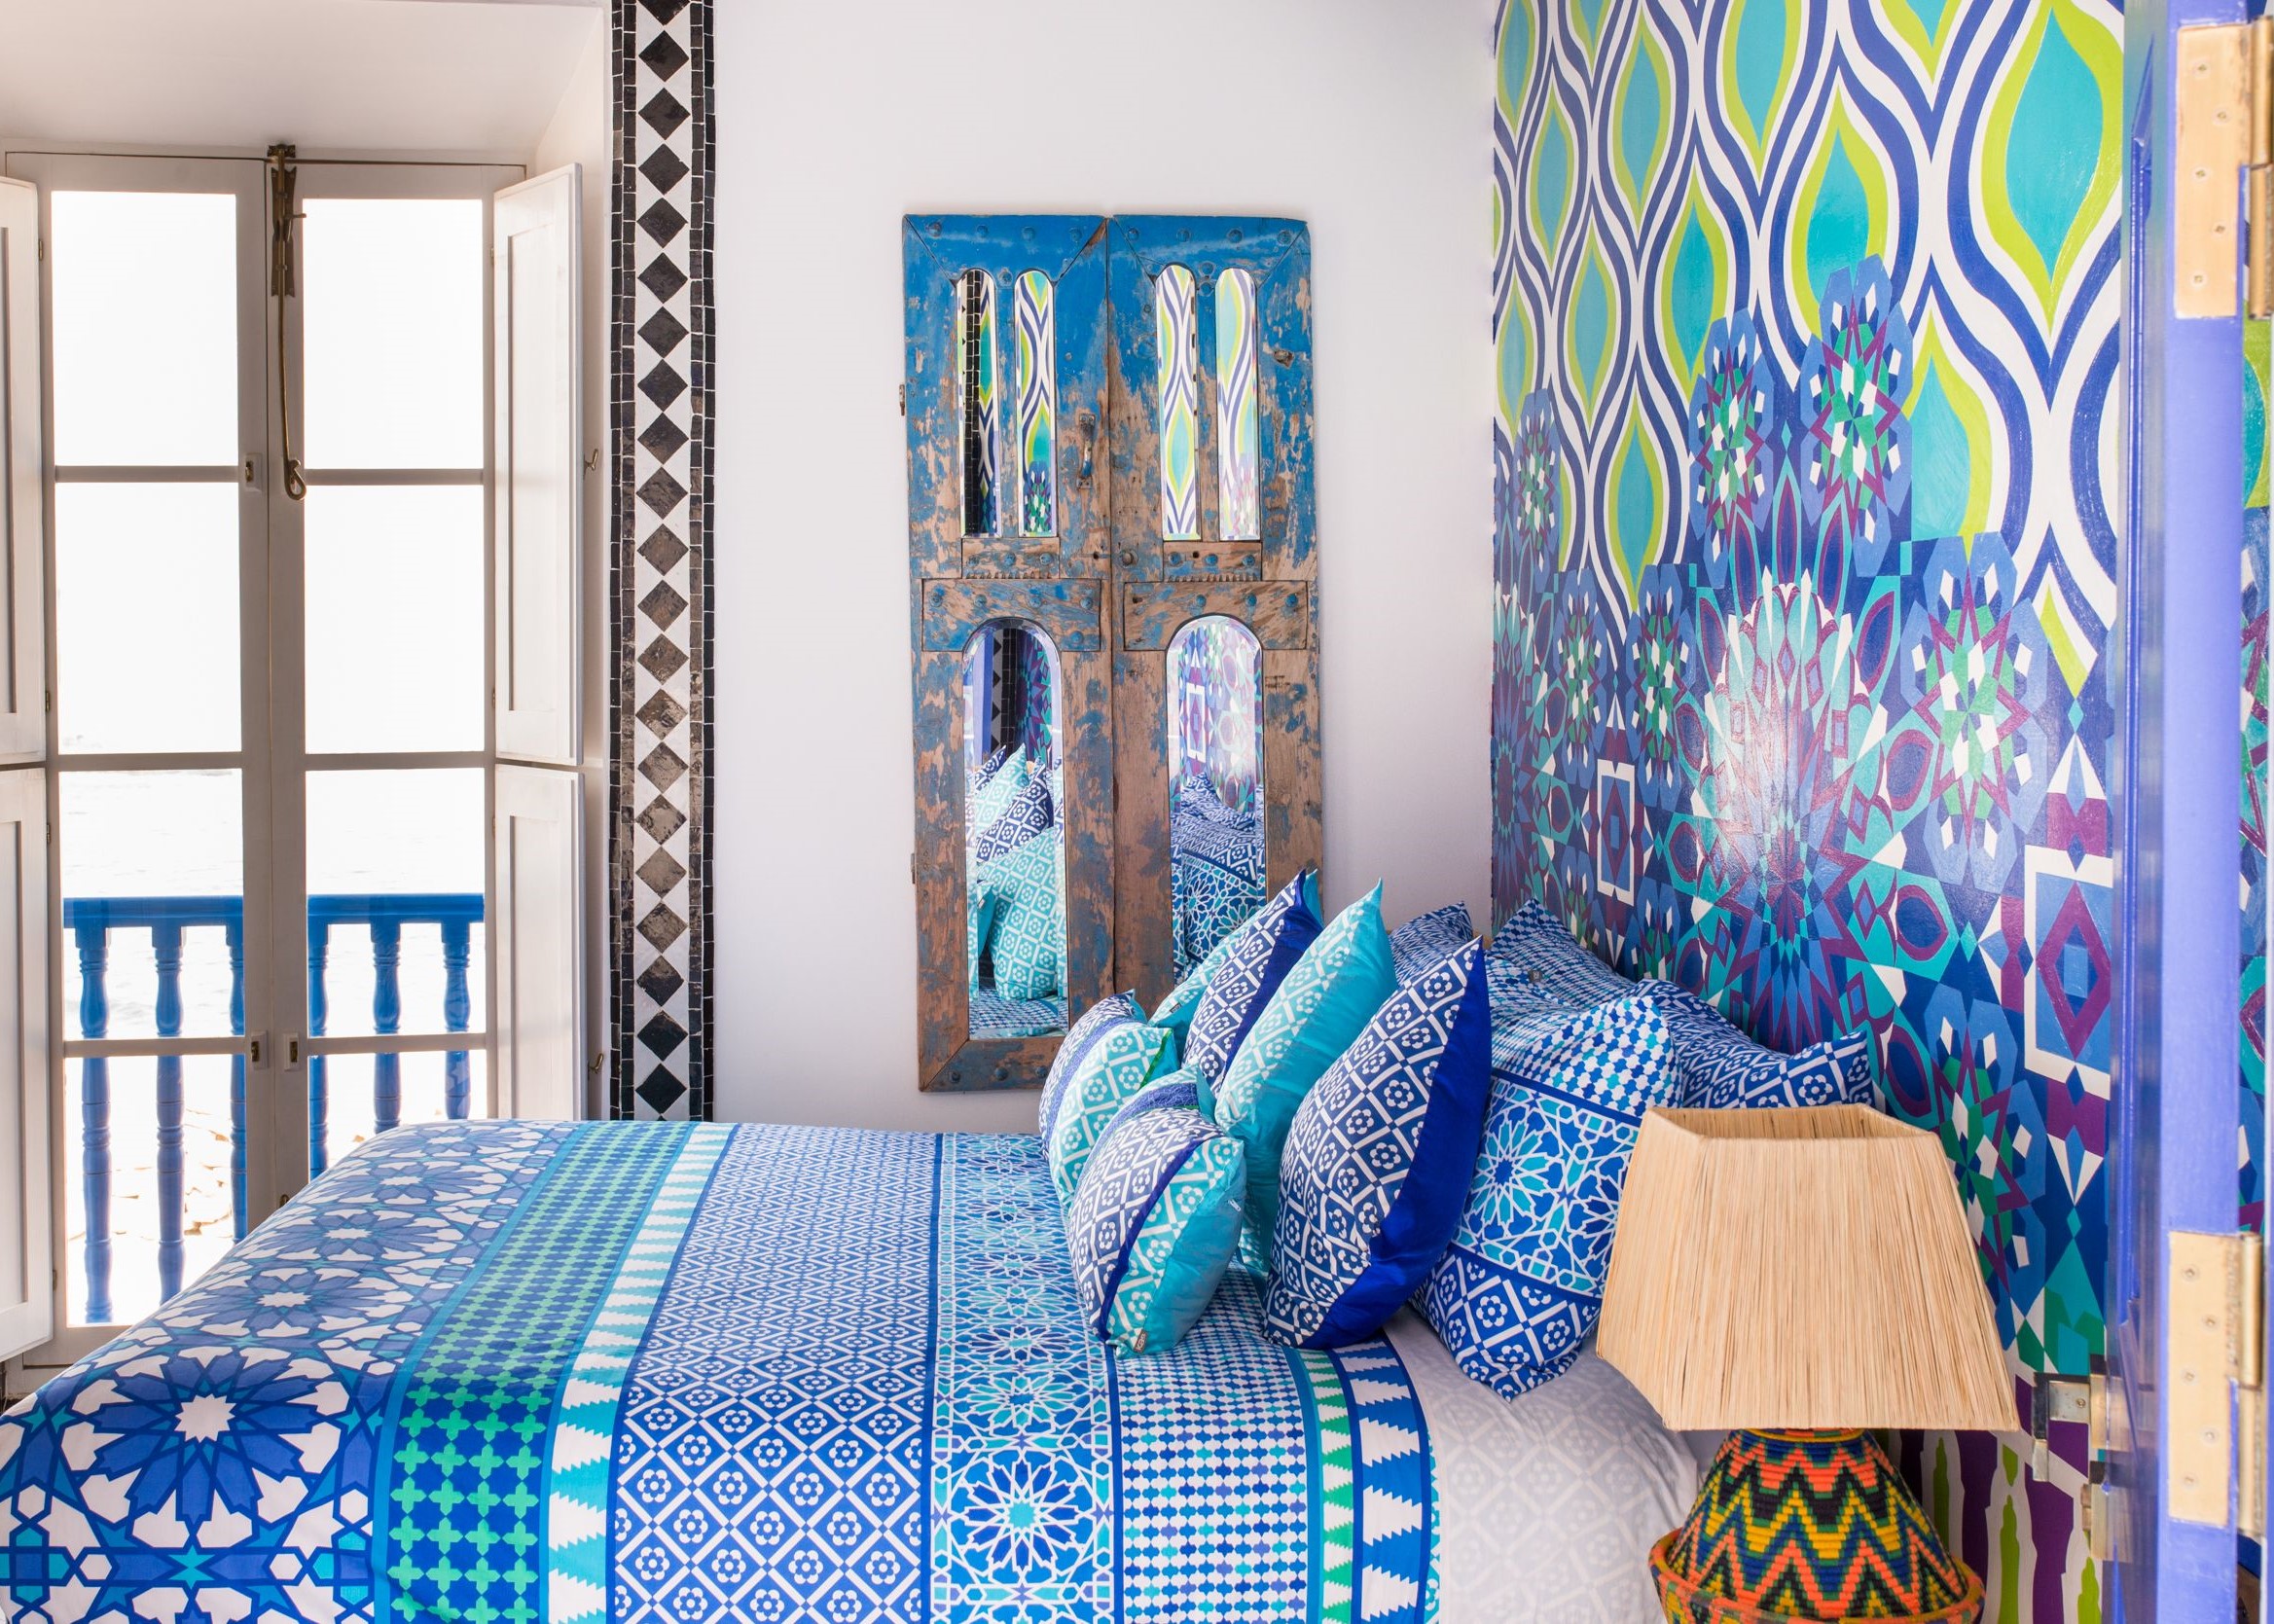 The 10 BEST hotels in Essaouira and surrounding countryside for 2023